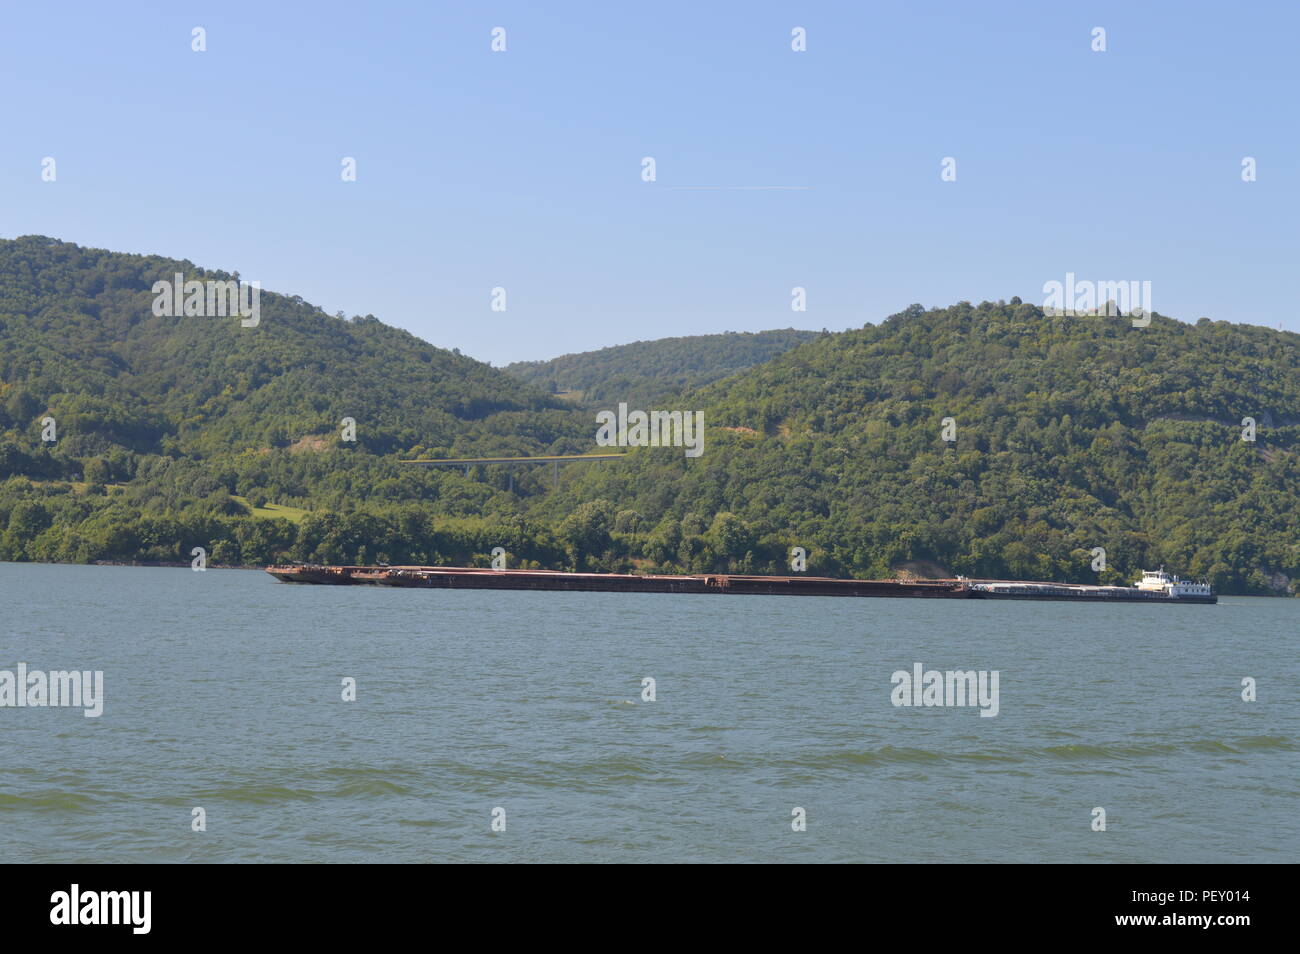 Boats on the Danube river Stock Photo